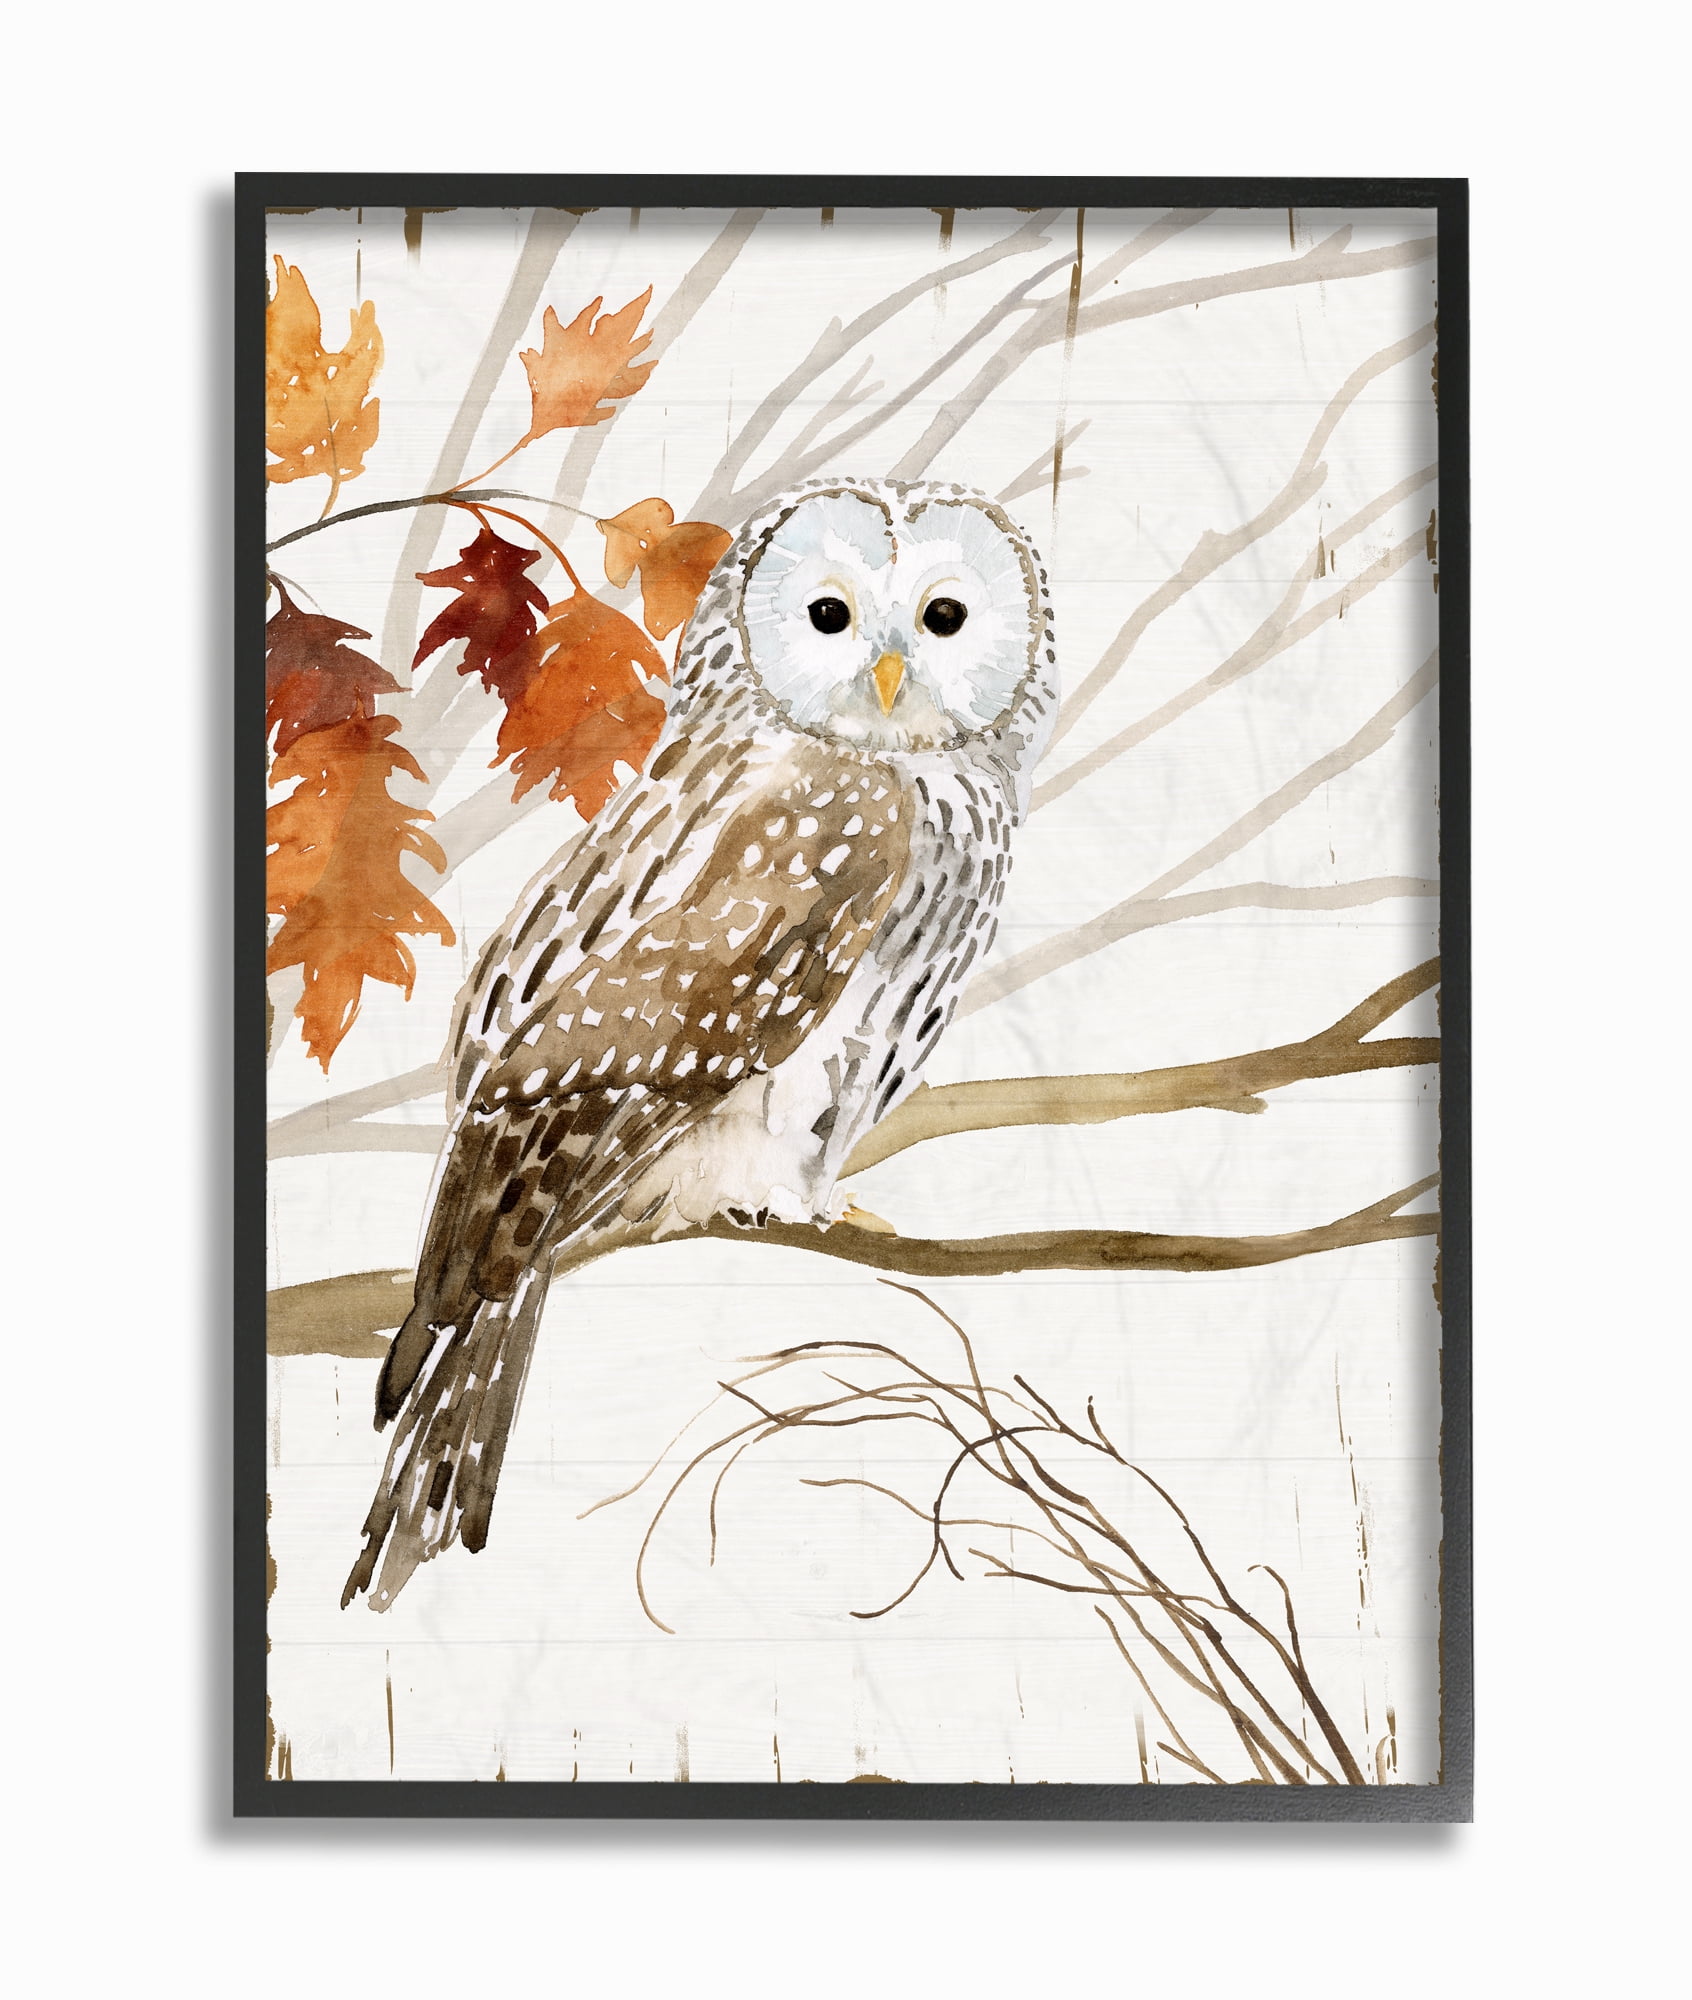 Stupell Industries Owl In Autumn Forest Animal Watercolor Painting Black Framed Wall Art, 16 X 20, Byvictoria Borges - Walmart.com